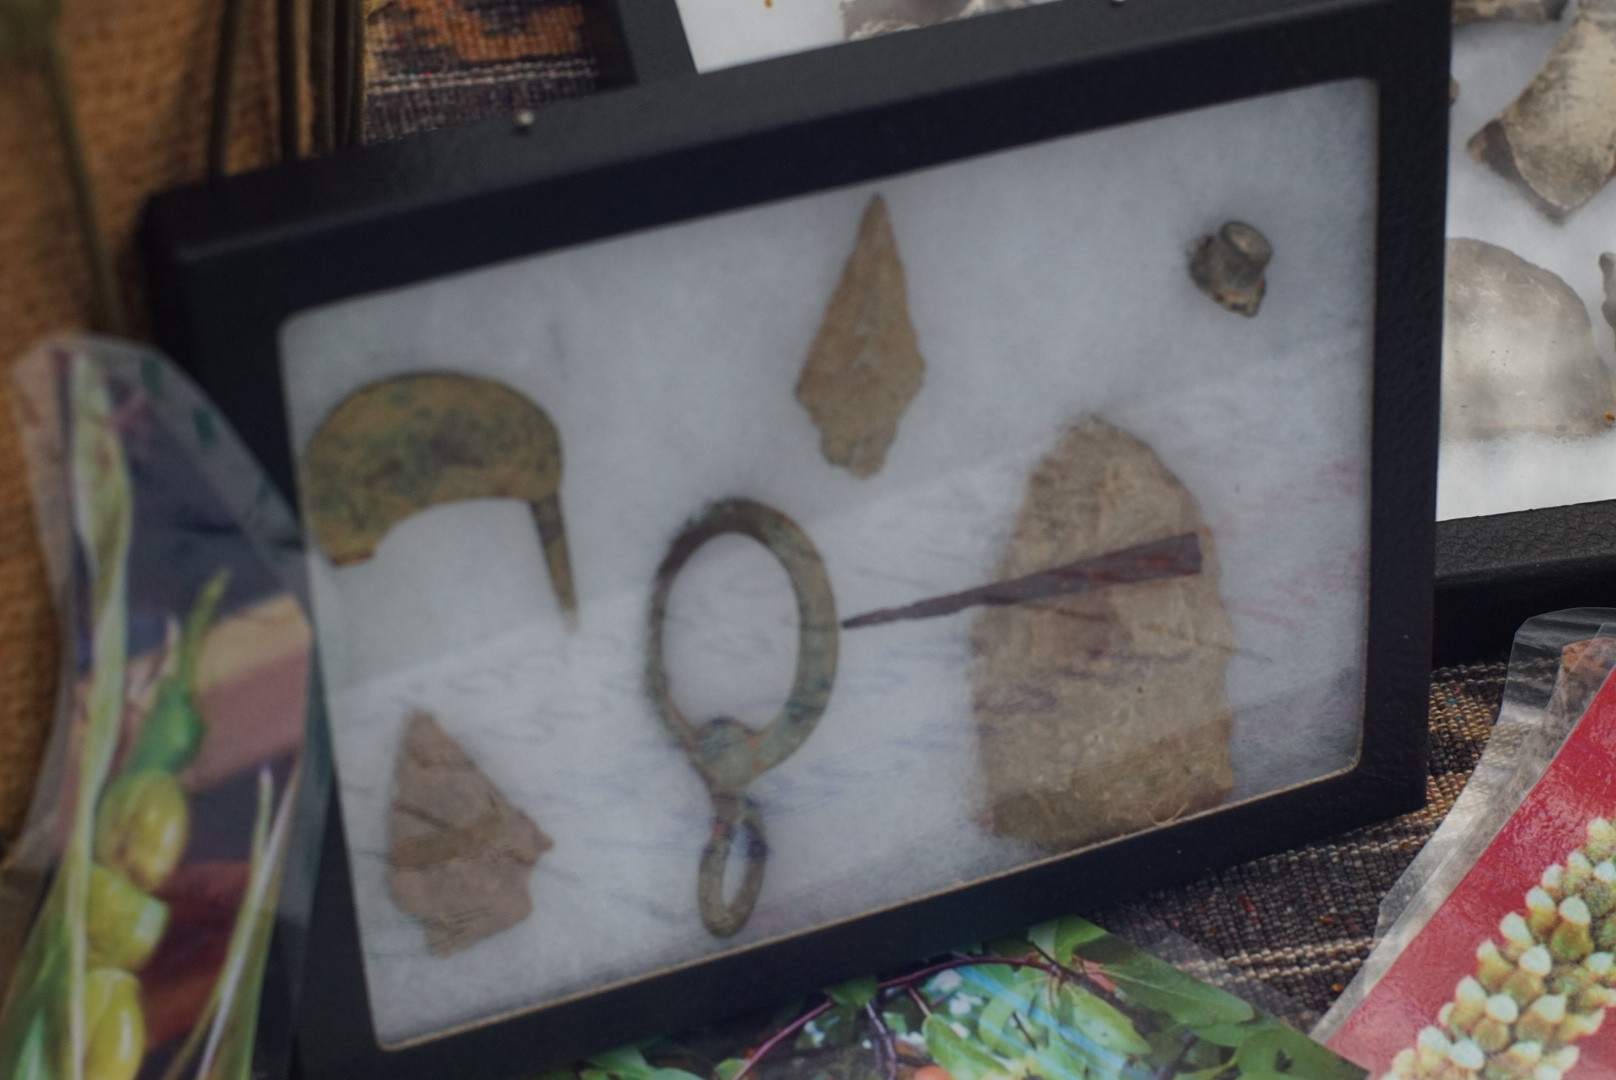 Pottery fragments, arrowheads and other artifacts on display